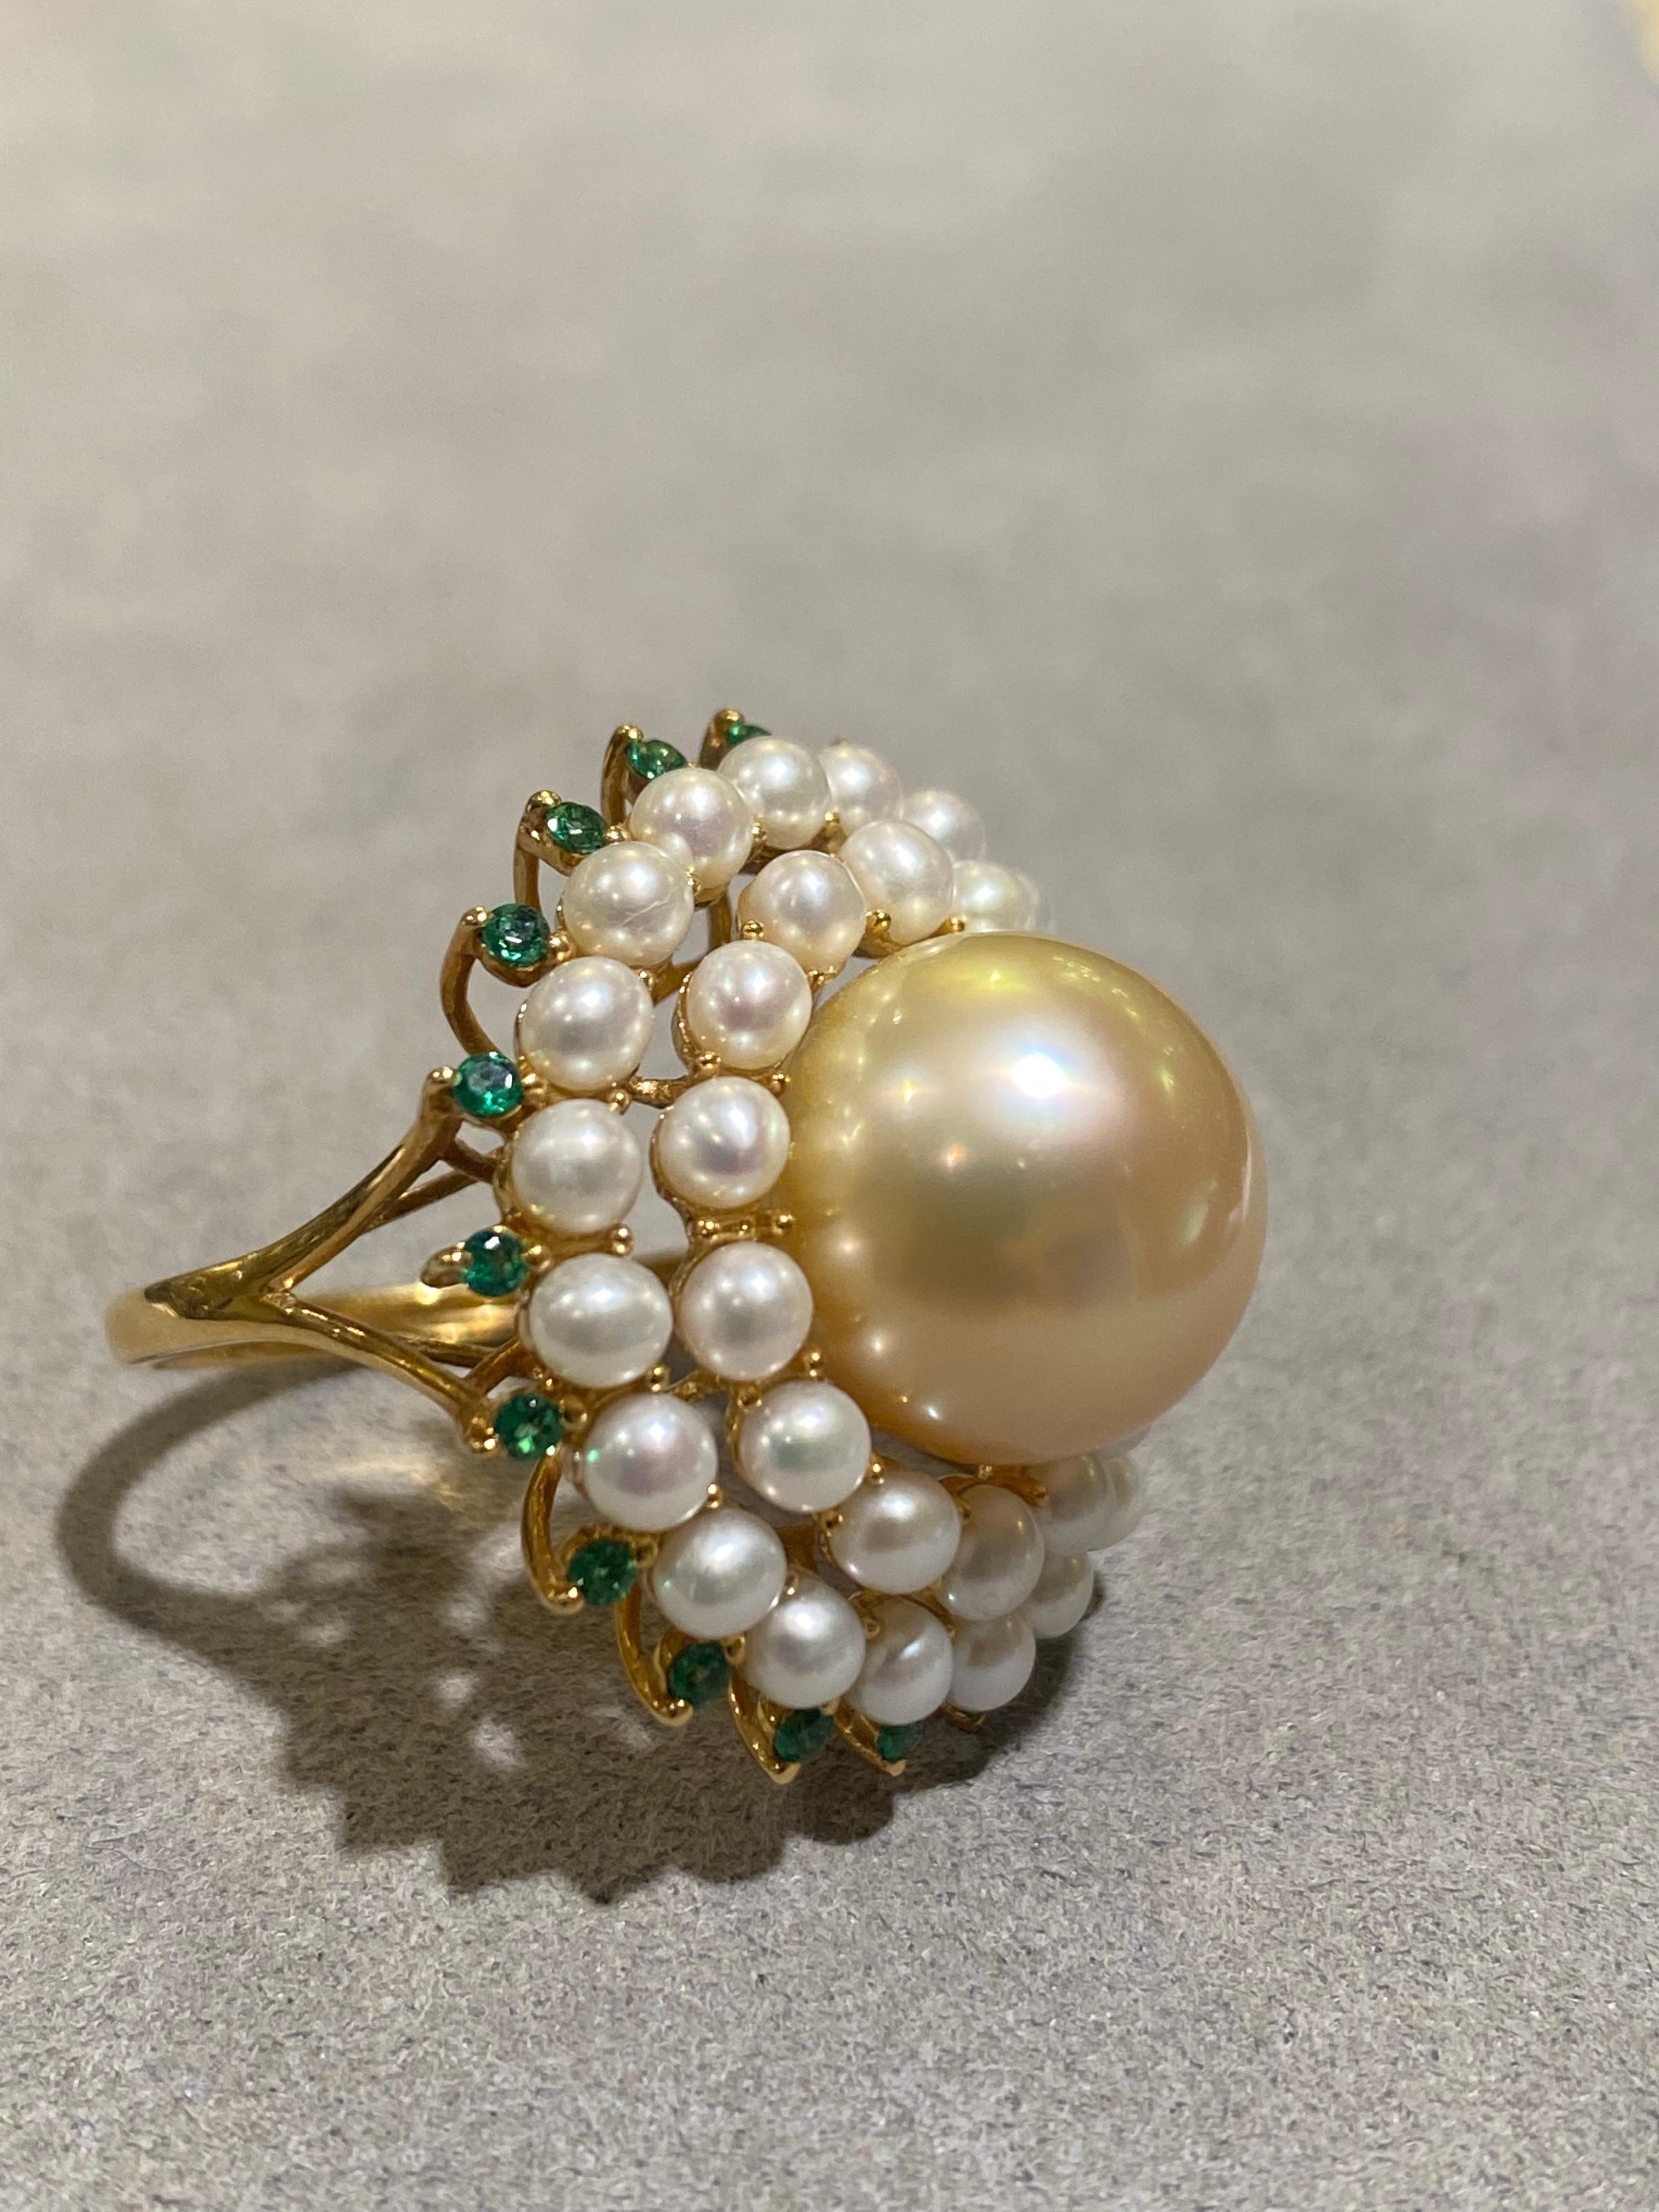 A 12.5 mm light gold colour south sea pearl is surrounded by 2 layers of small white seed pearls in a descending circle. It is a big yet elegant cocktail ring for any occasions. 

The colour of the pearl is light gold with pink overtone. The pearl